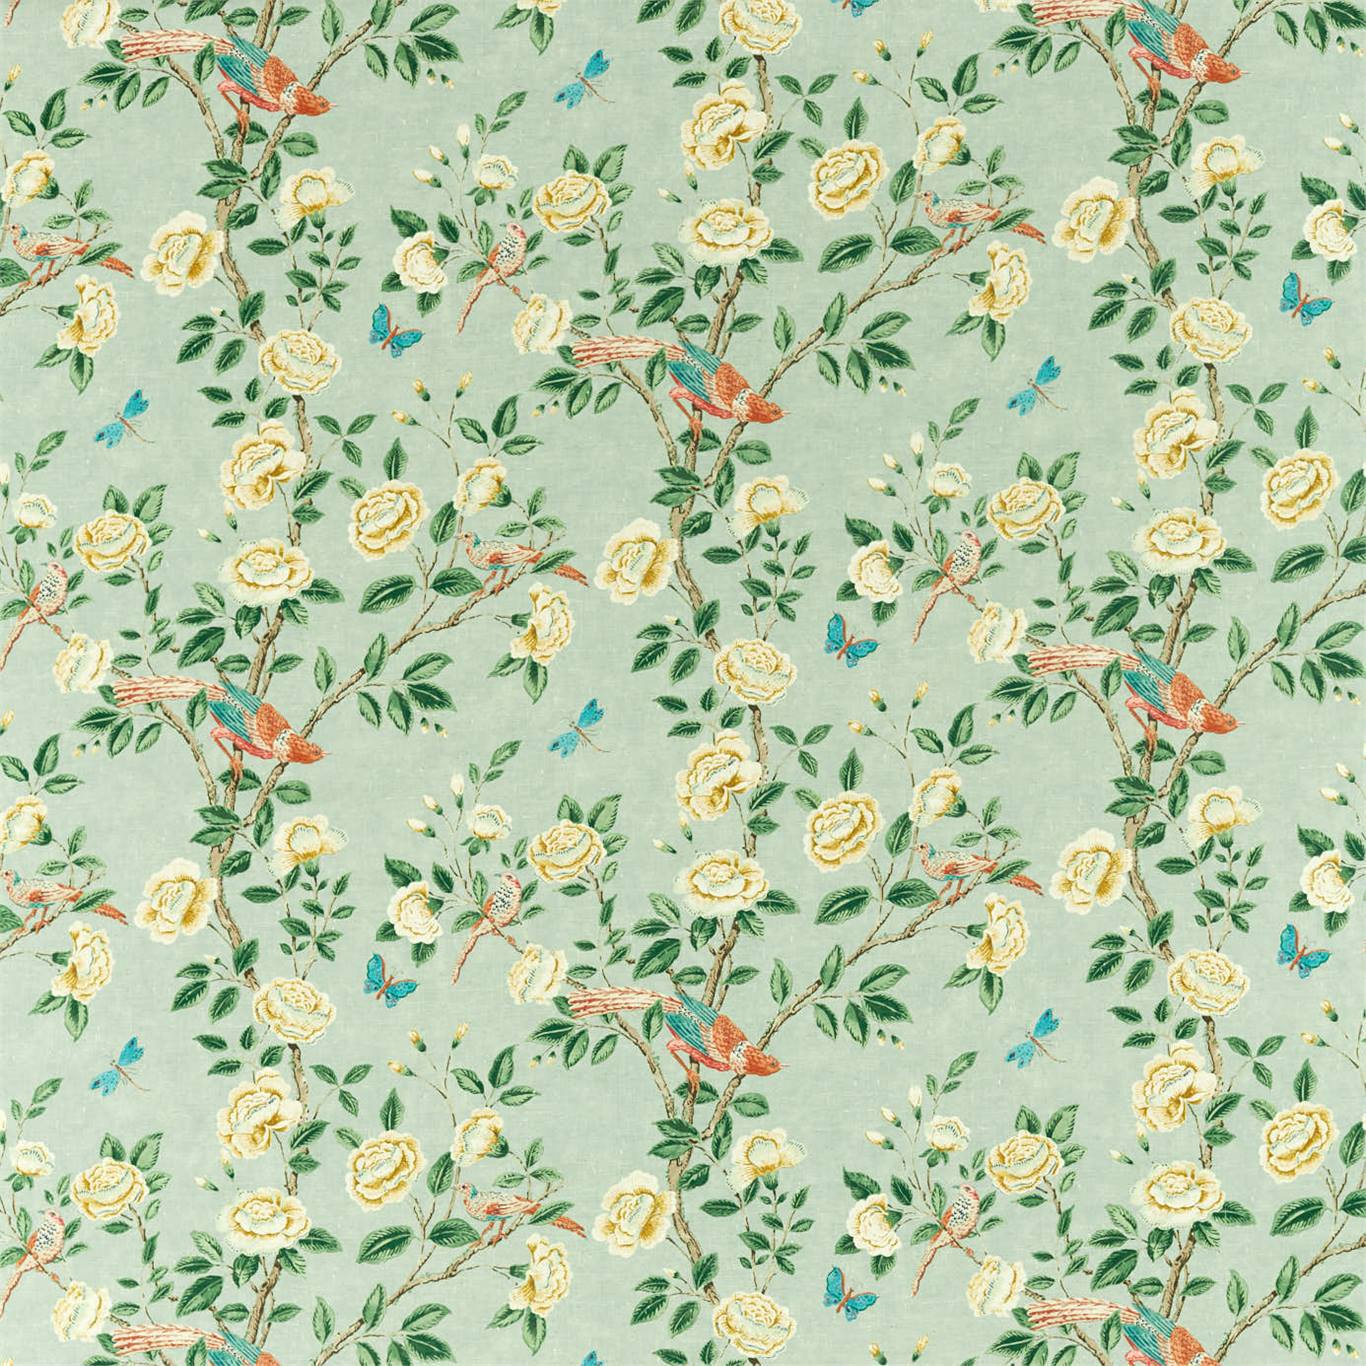 Andhara Fabric by Sanderson - DCEF226631 - Seaglass